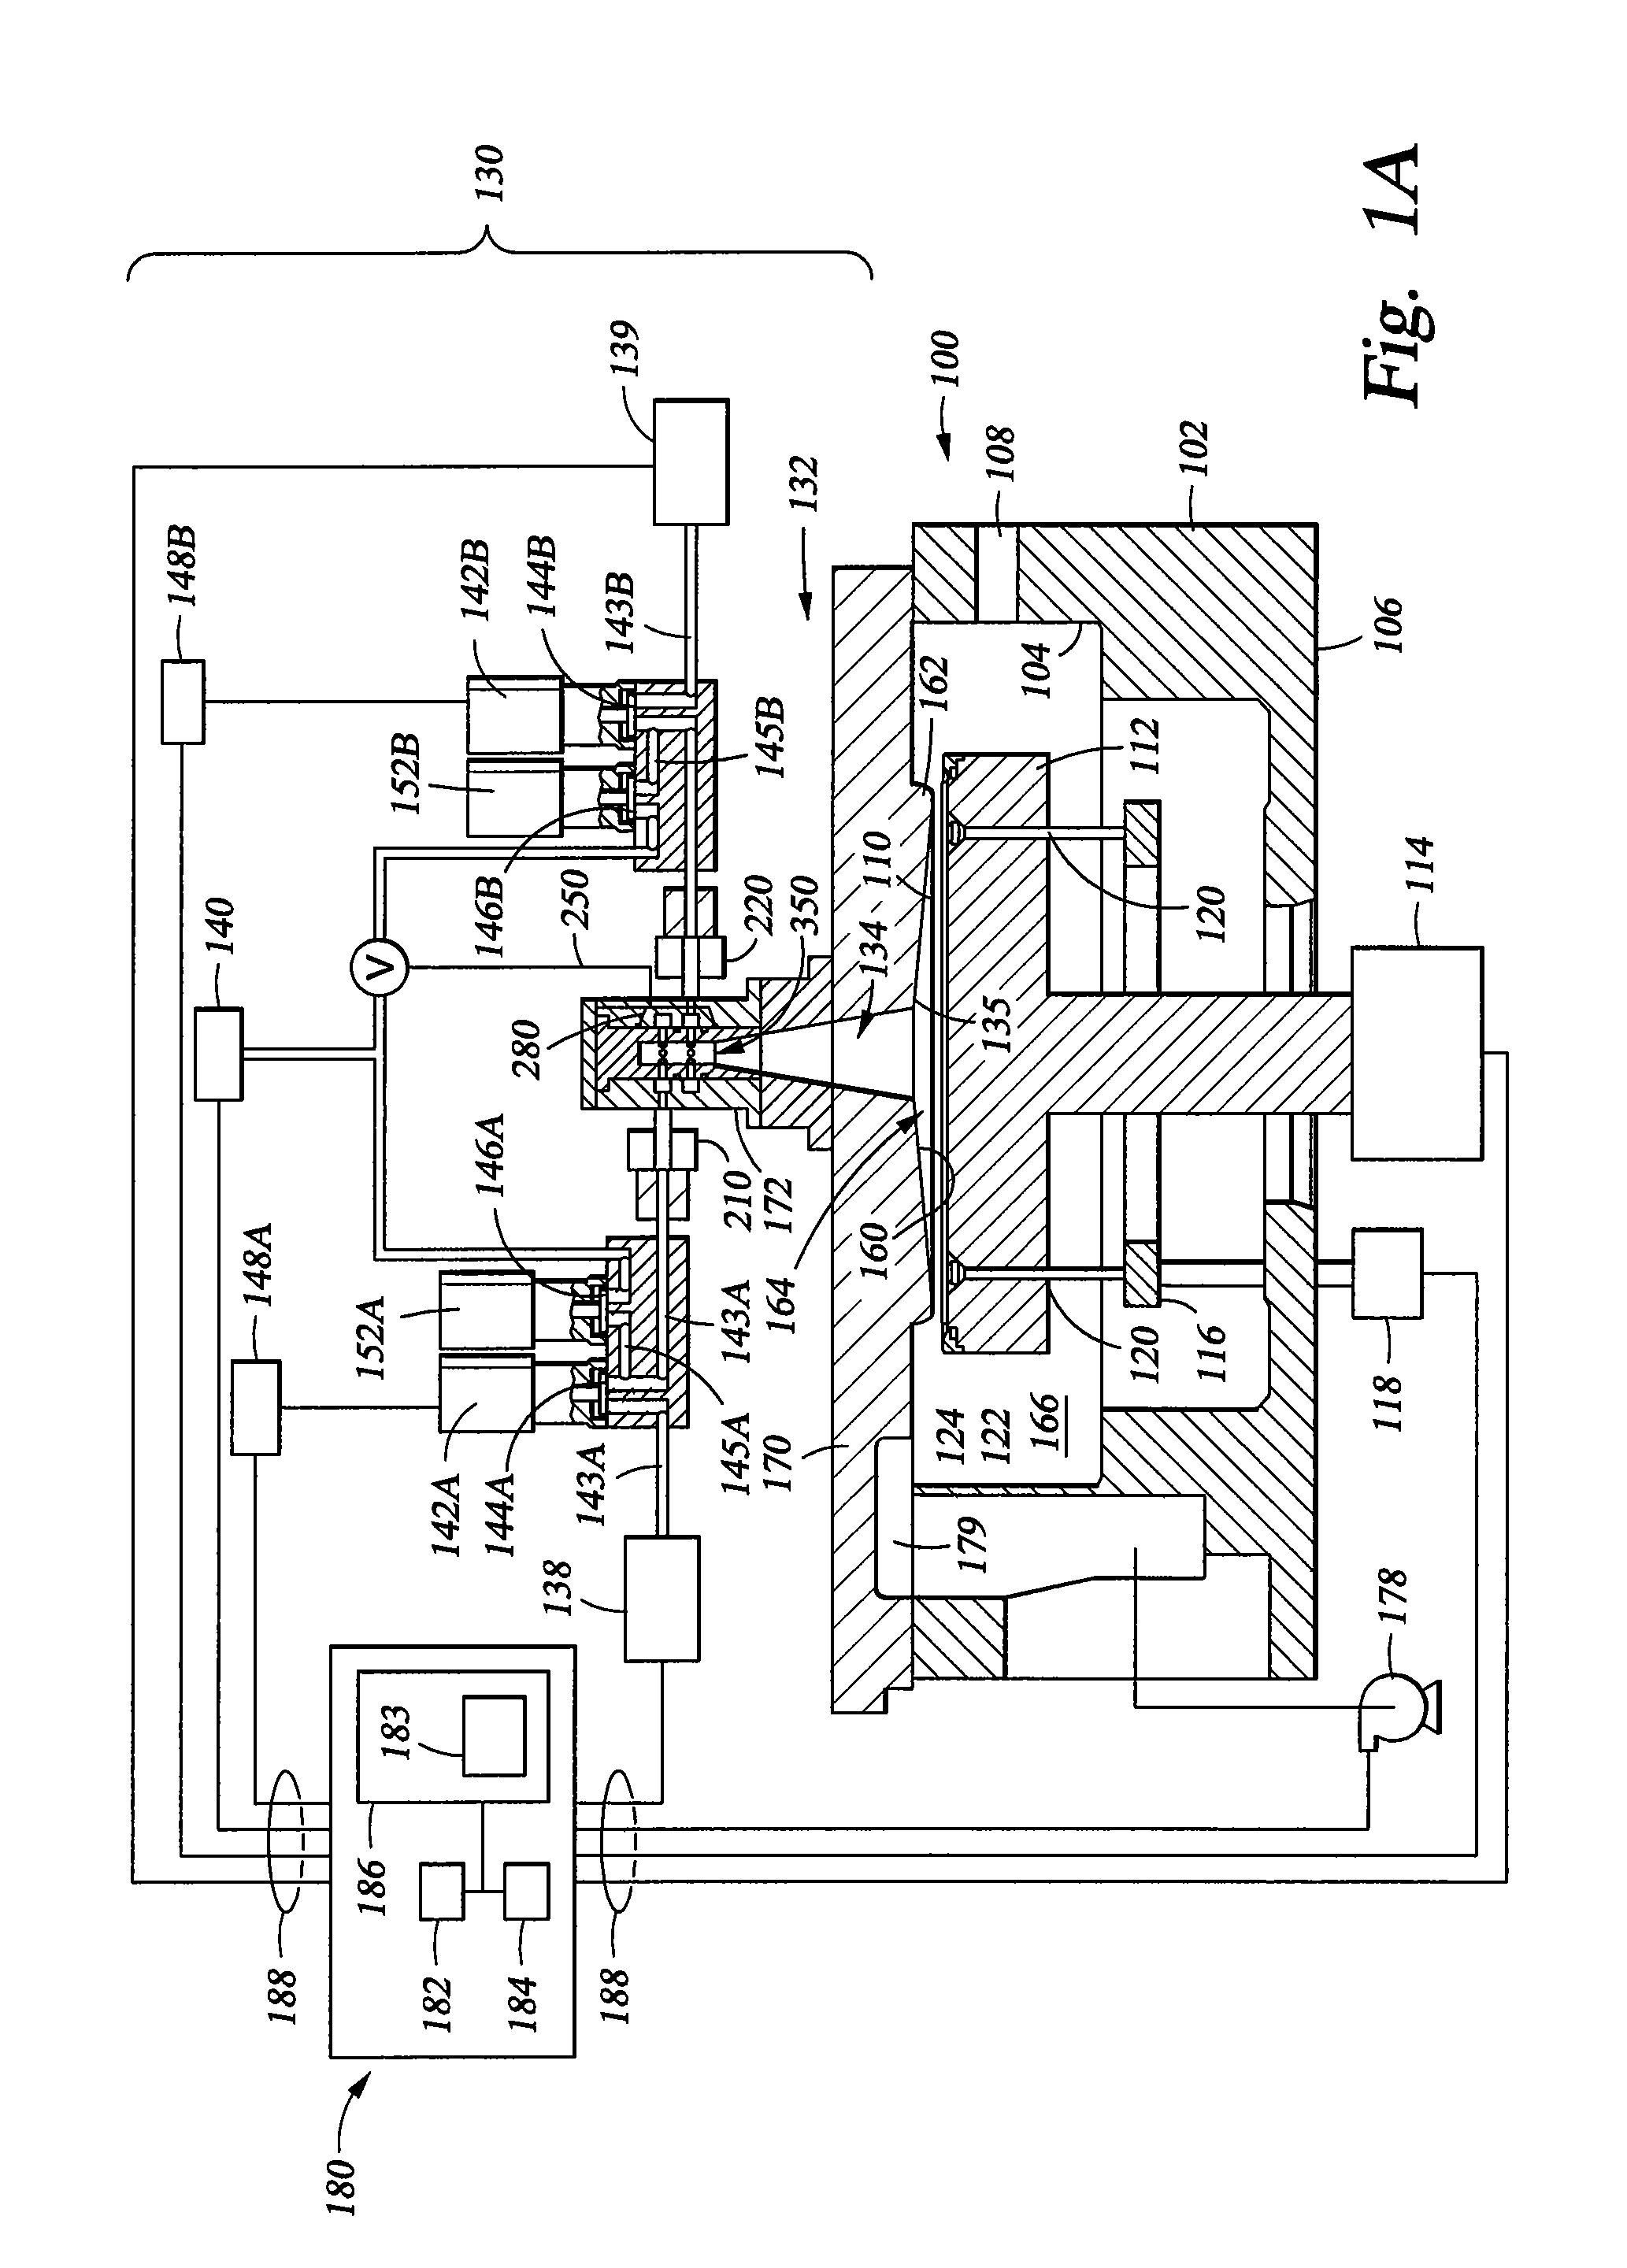 Atomic layer deposition chamber with multi inject